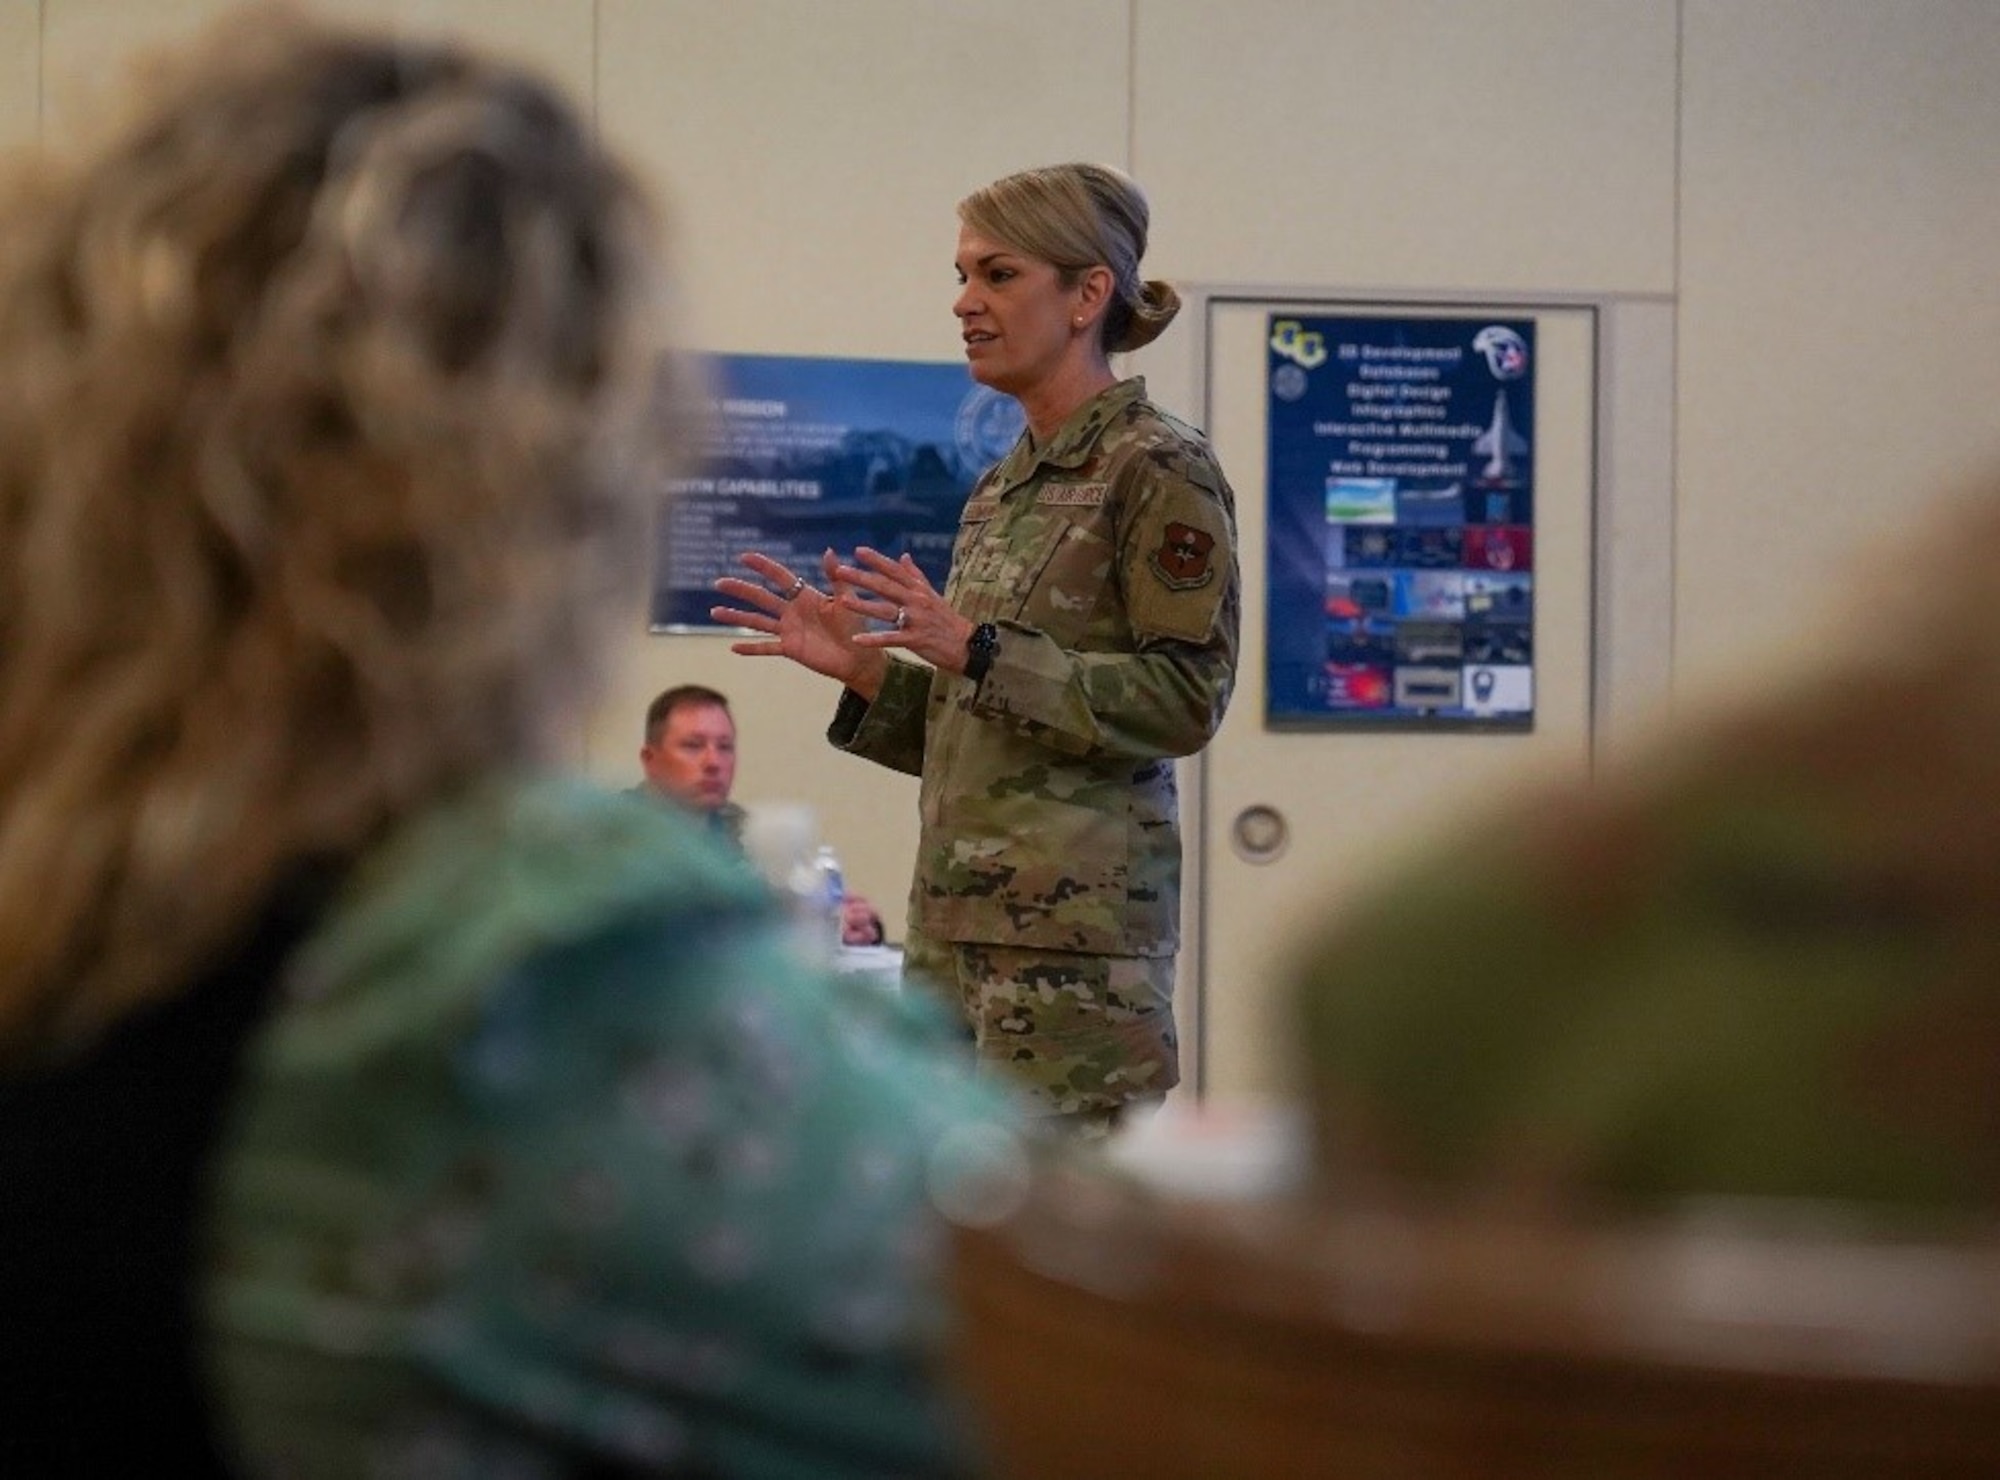 U.S. Air Force Maj. Gen. Michele Edmondson, Second Air Force commander, briefs attendees of Technical Training 101 in the Bay Breeze Event Center on Keesler Air Force Base, Mississippi, March 28, 2023.